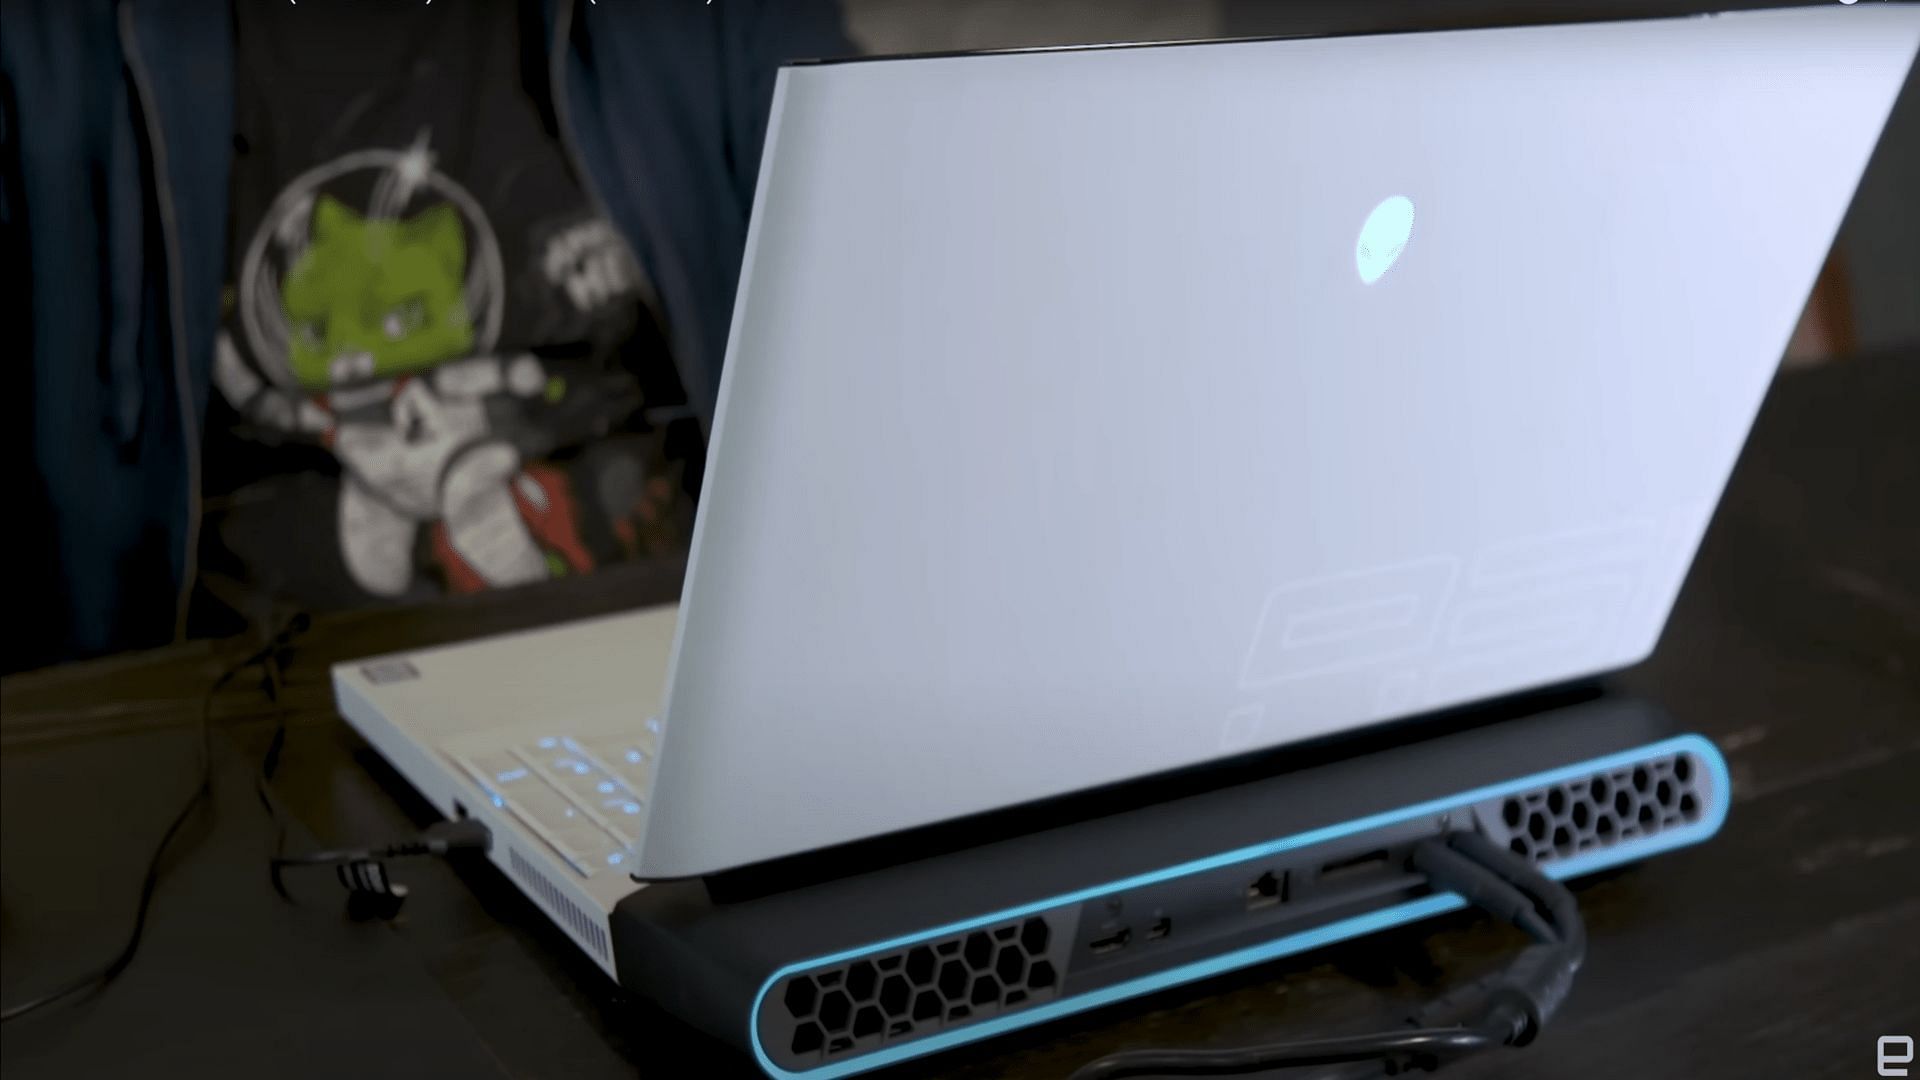 CES 2023: Dell and Alienware debut new laptops featuring RTX Mobile GPUs, specs, prices, and more (Image via Youtube/Jarrod